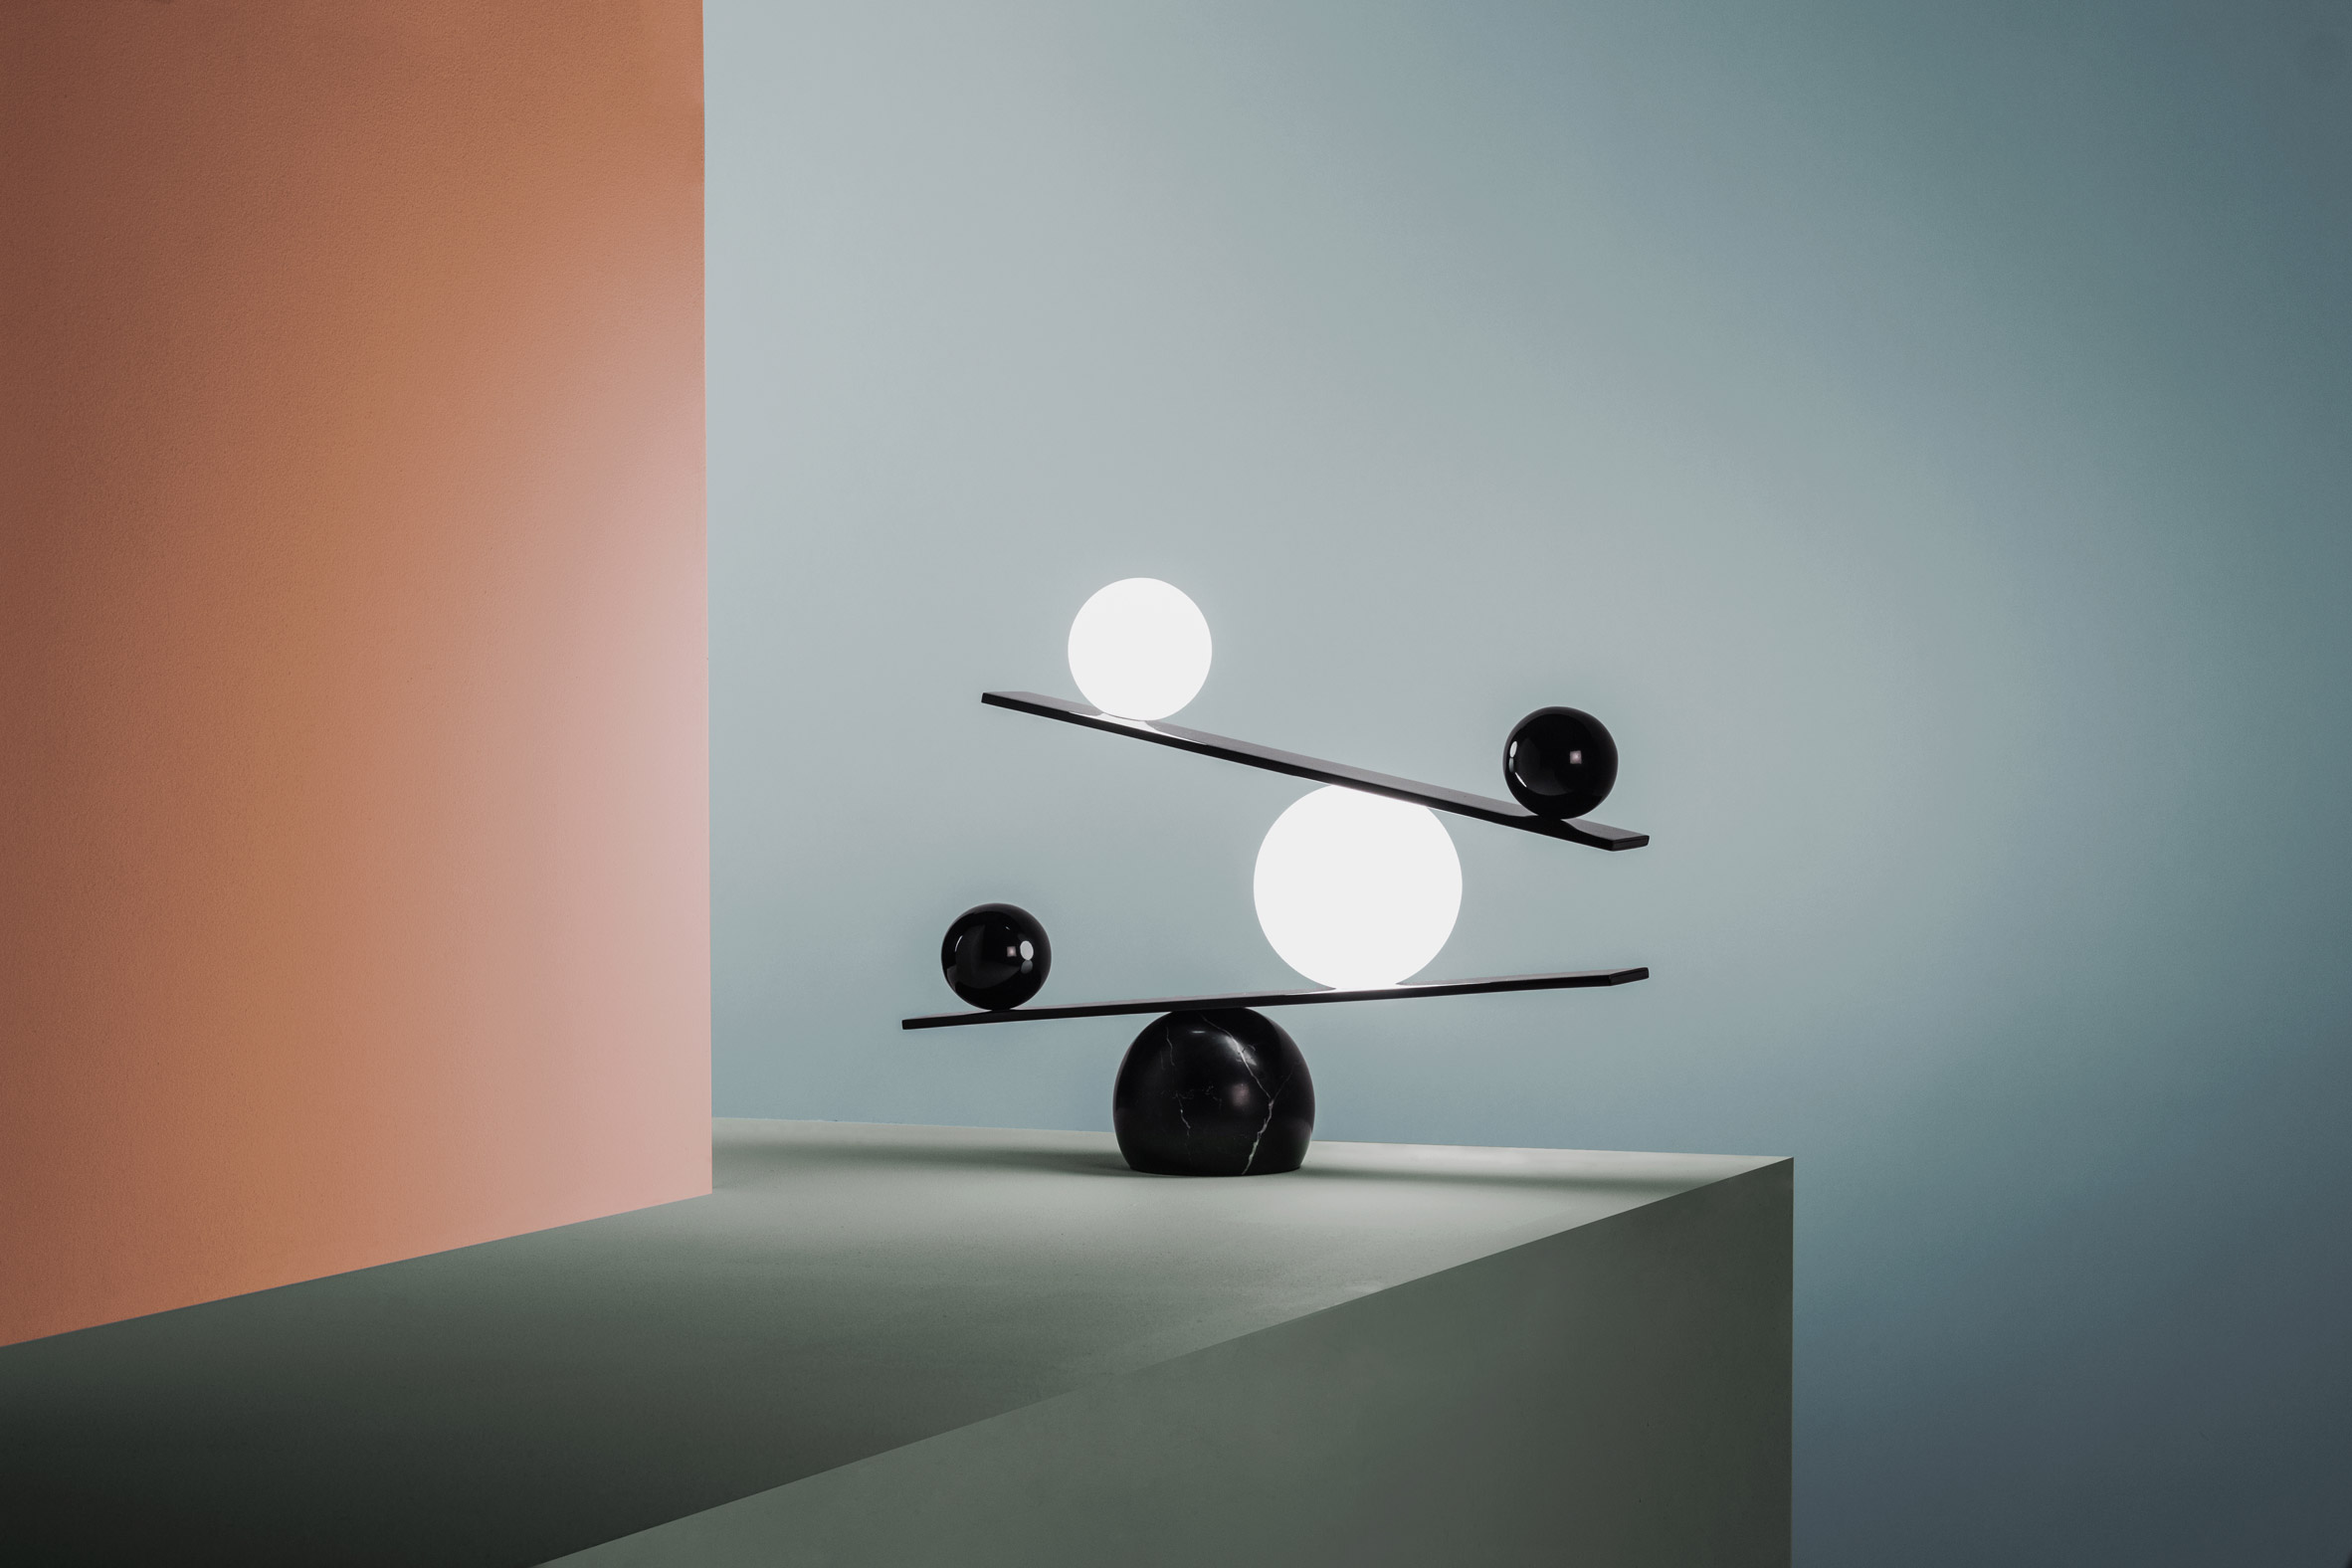 These are monochrome orb lamps put on angular shelves, all the wires hidden